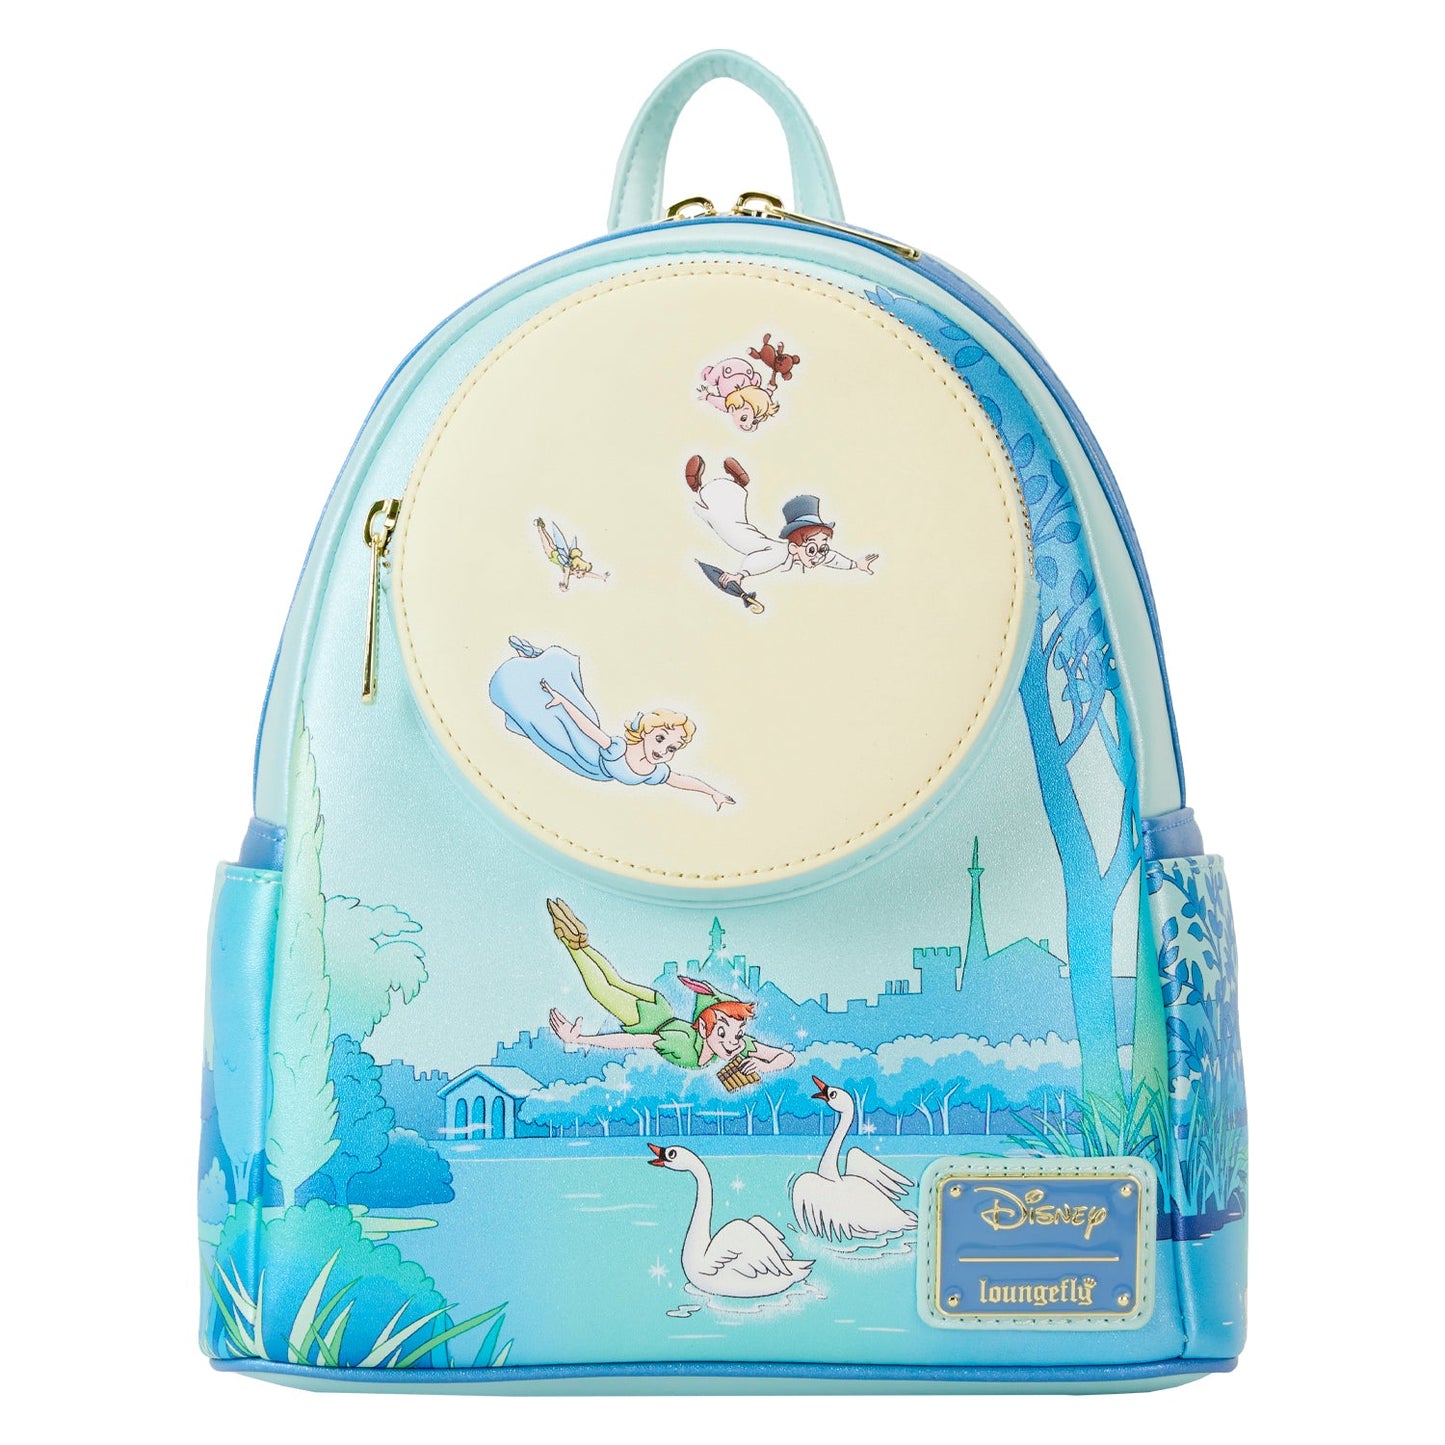 Peter Pan You Can Fly Glow Mini Backpack *PRE-ORDER ITEM*